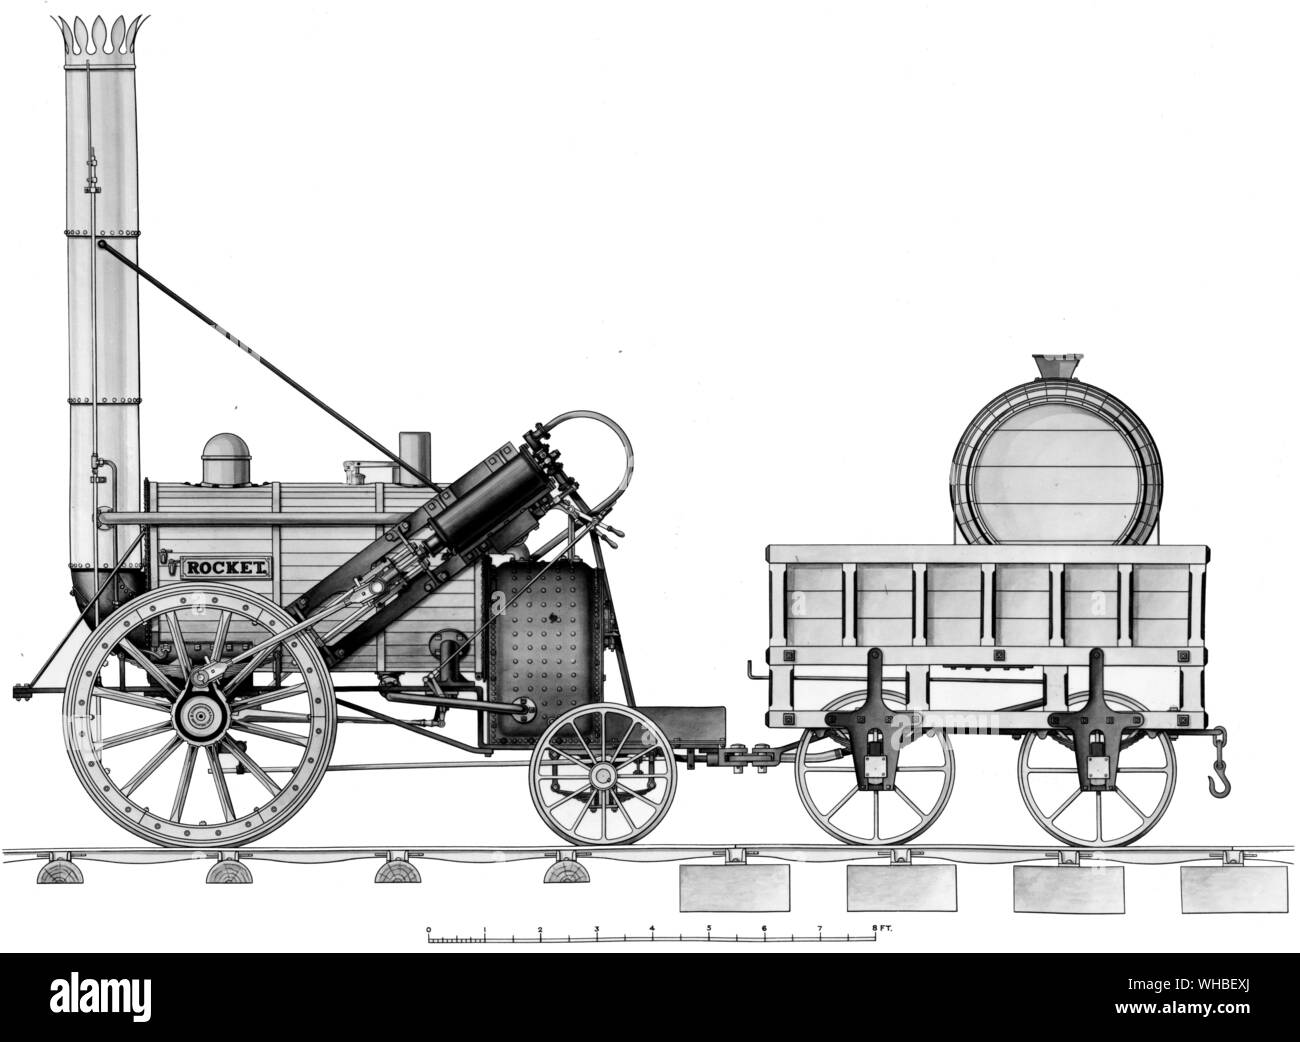 Drawing of The Rocket - this locomotive was built by George Stevenson at Newcastle-on-Tyne in 1829 to compete for a prize of £500 offered by the directors of the Liverpool and Manchester Railway Company for the best locomotive which could at that time be produced. Five locomotives by different makers were entered for the competition which was won by the Rocket after what, in those days, were considered very exhaustive and severe tests. The Rocket weighed four and a half tons. Stock Photo